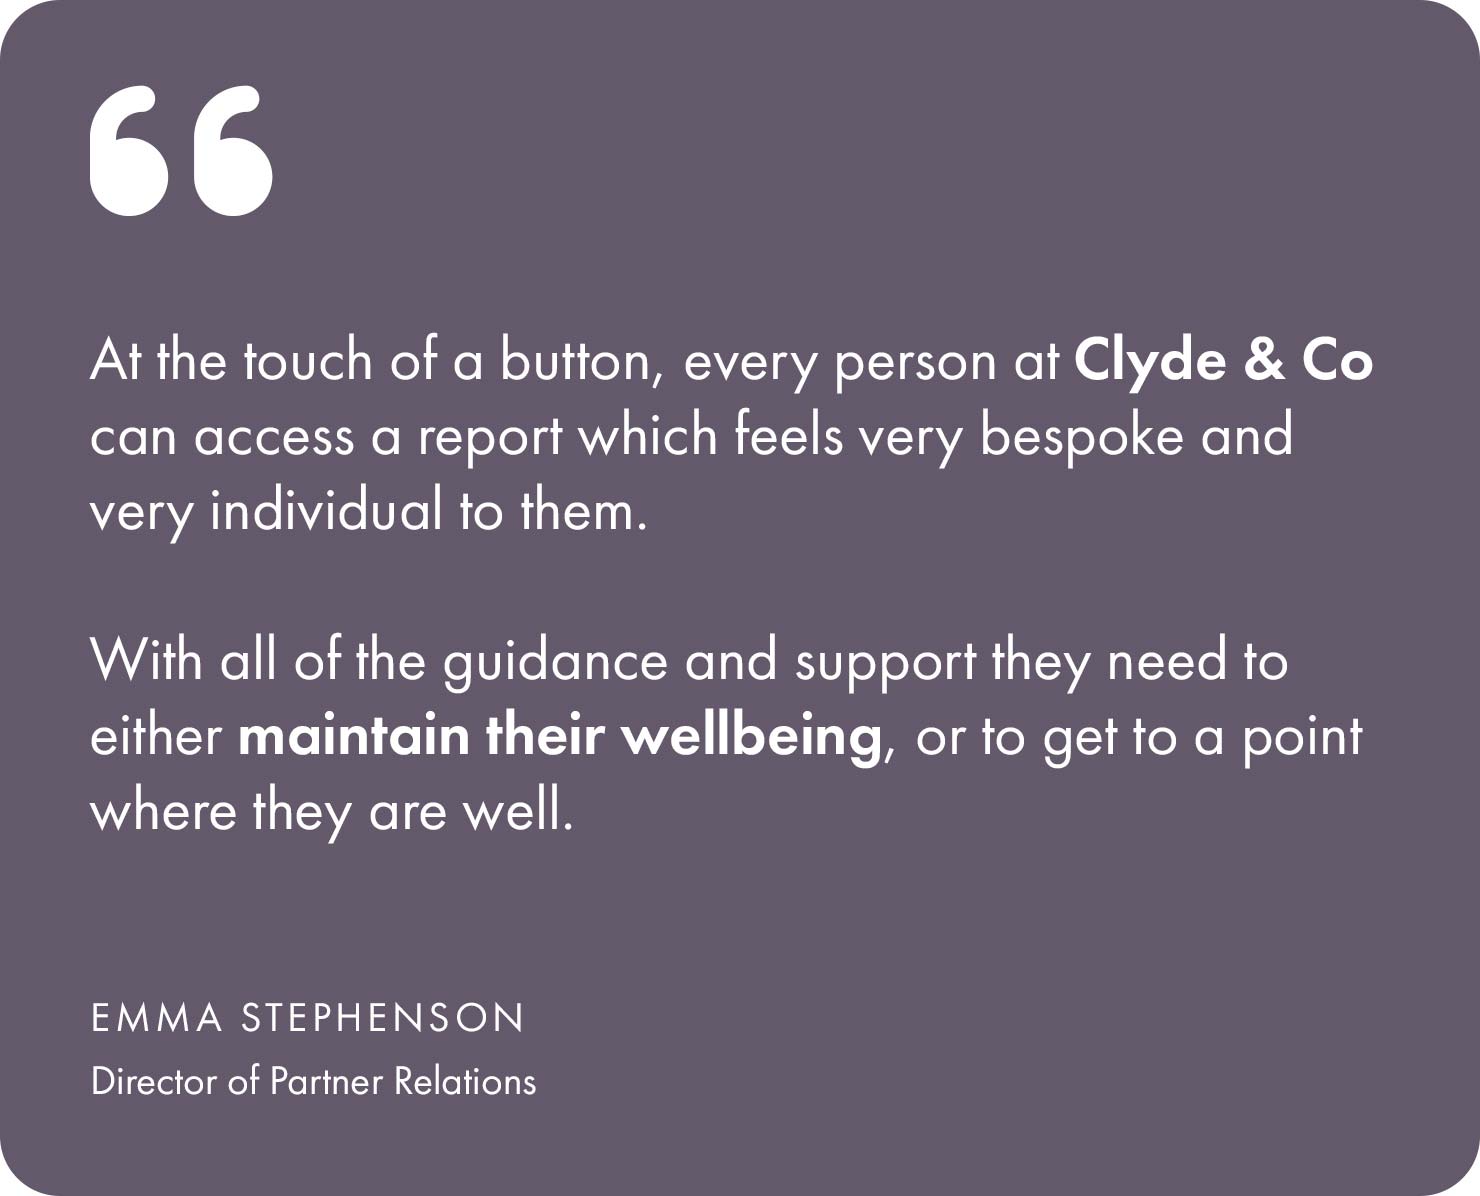 At the touch of a button, every person at Clyde & Co can access a report which feels very bespoke and very individual to them, with all of the guidance and support they need to either maintain their wellbeing, or to get to a point where they are well.